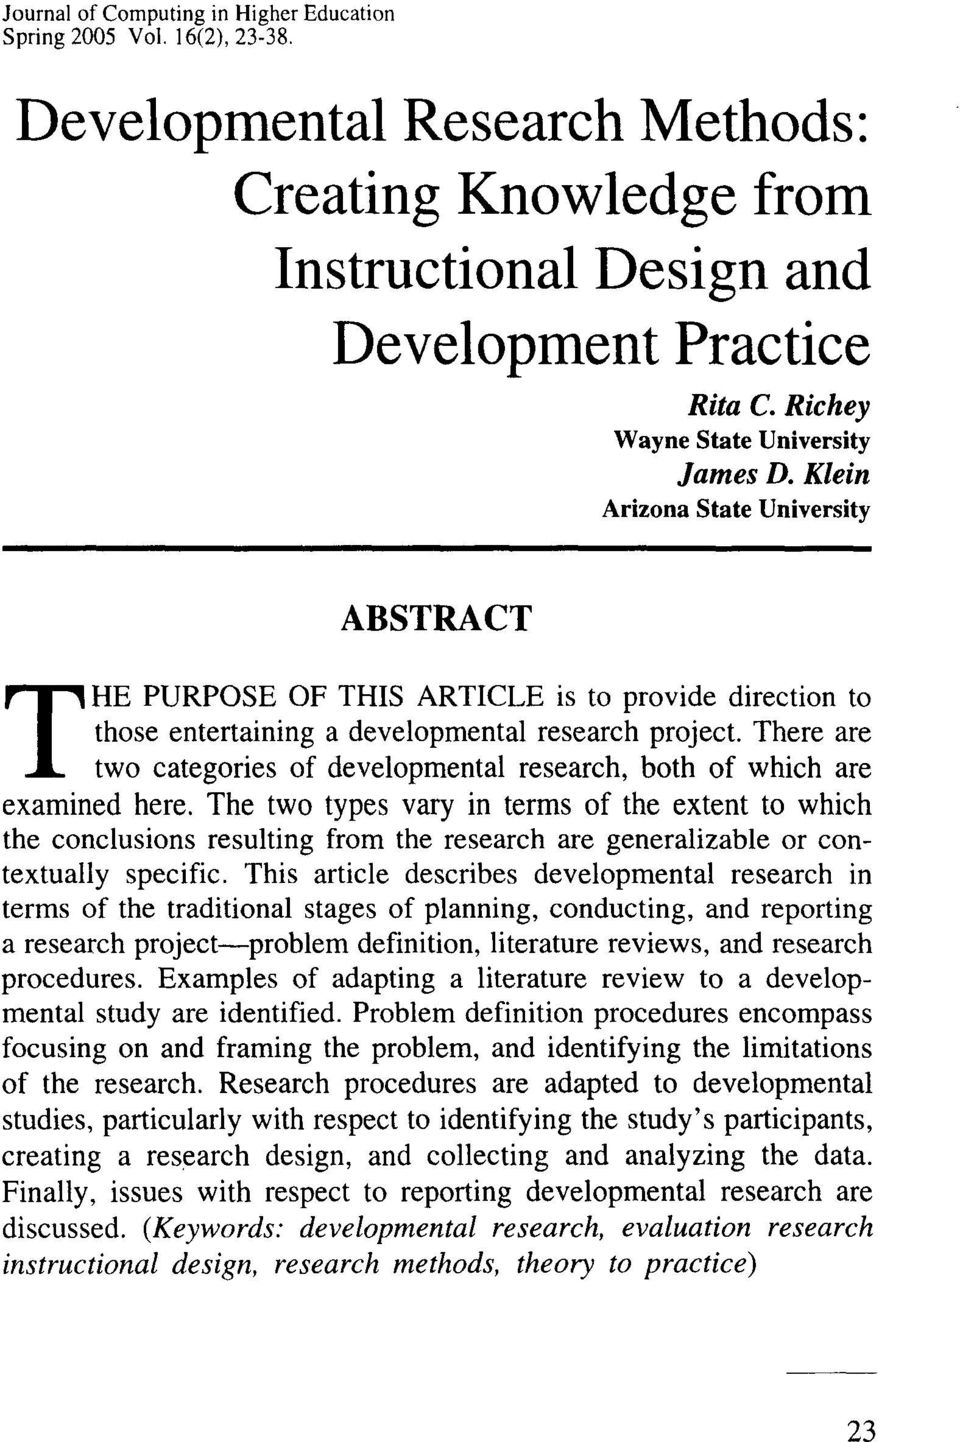 Developmental Research Methods Creating Knowledge From Instructional Design And Development Practice Abstract Pdf Free Download,Coursera Graphic Design Assignment